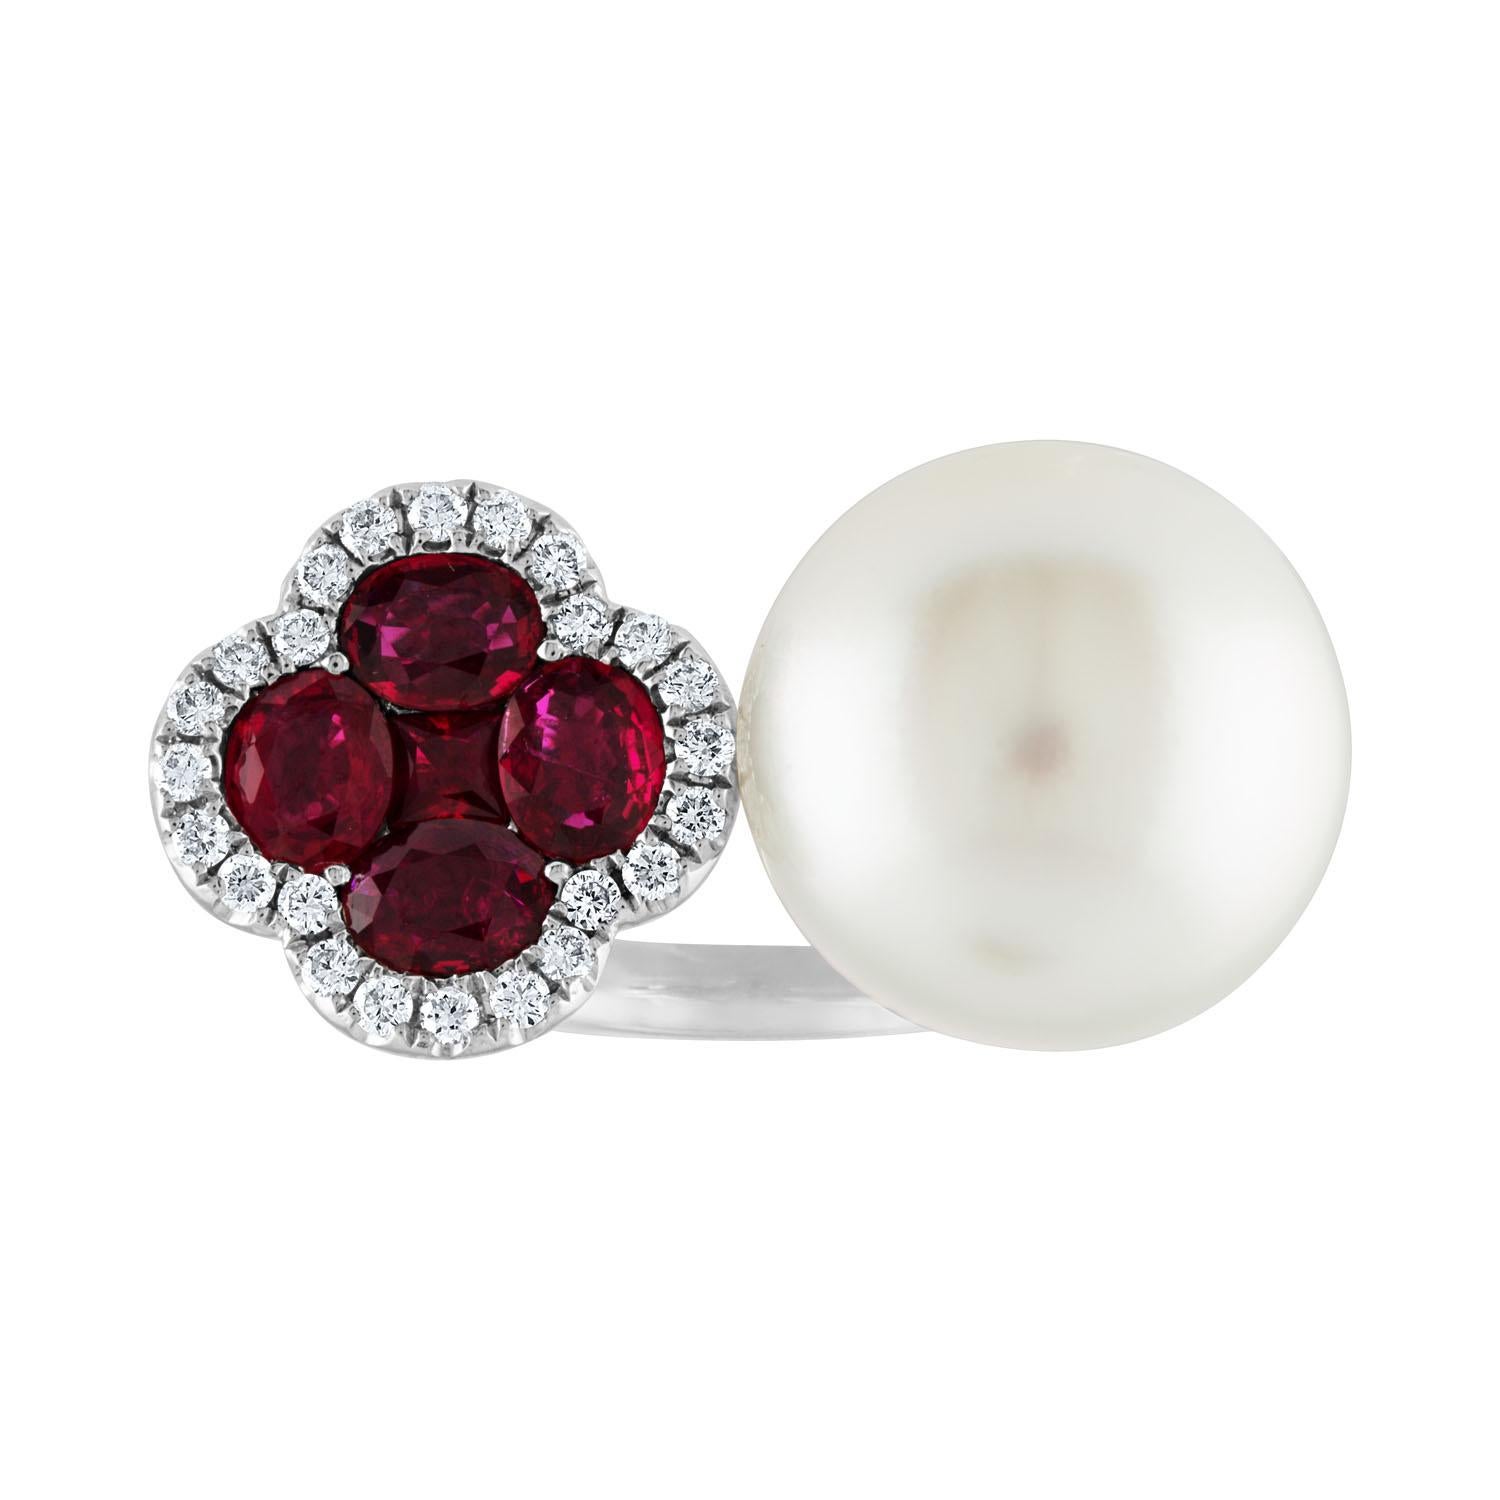 Between The Finger Ring
The ring is 18K White Gold
There are 1.70 Carats in Rubies
There are 0.30 Carats in Diamonds G/H VS/SI
The South Sea Pearl is 14.50MM
The ring is a size 6.75, sizable.
The ring weighs 10.7 grams